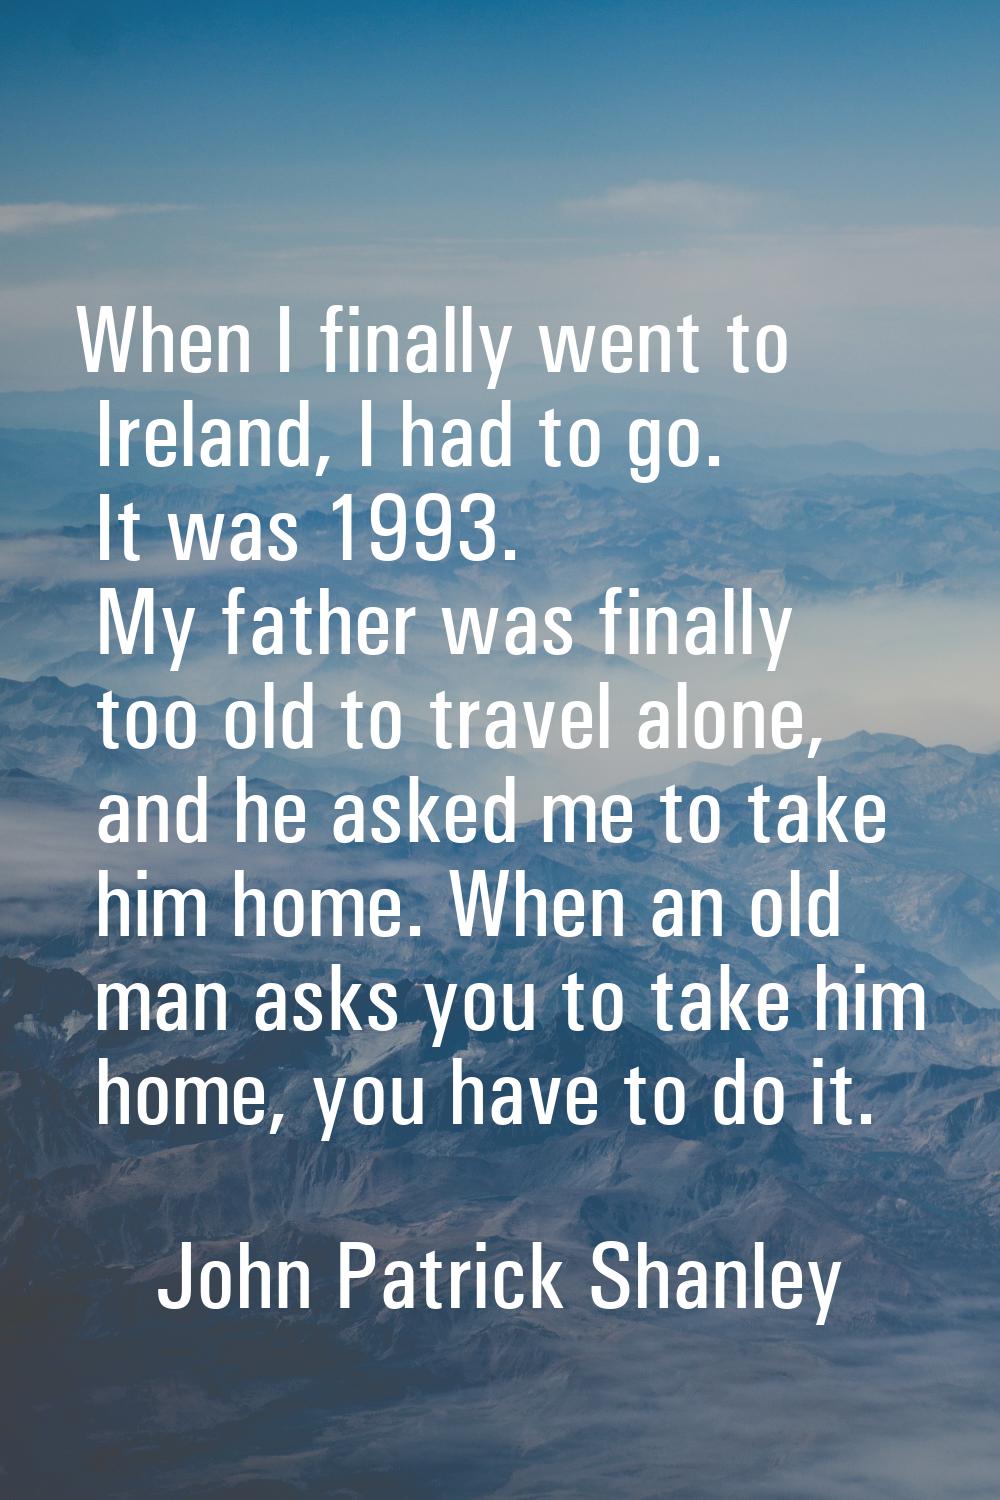 When I finally went to Ireland, I had to go. It was 1993. My father was finally too old to travel a